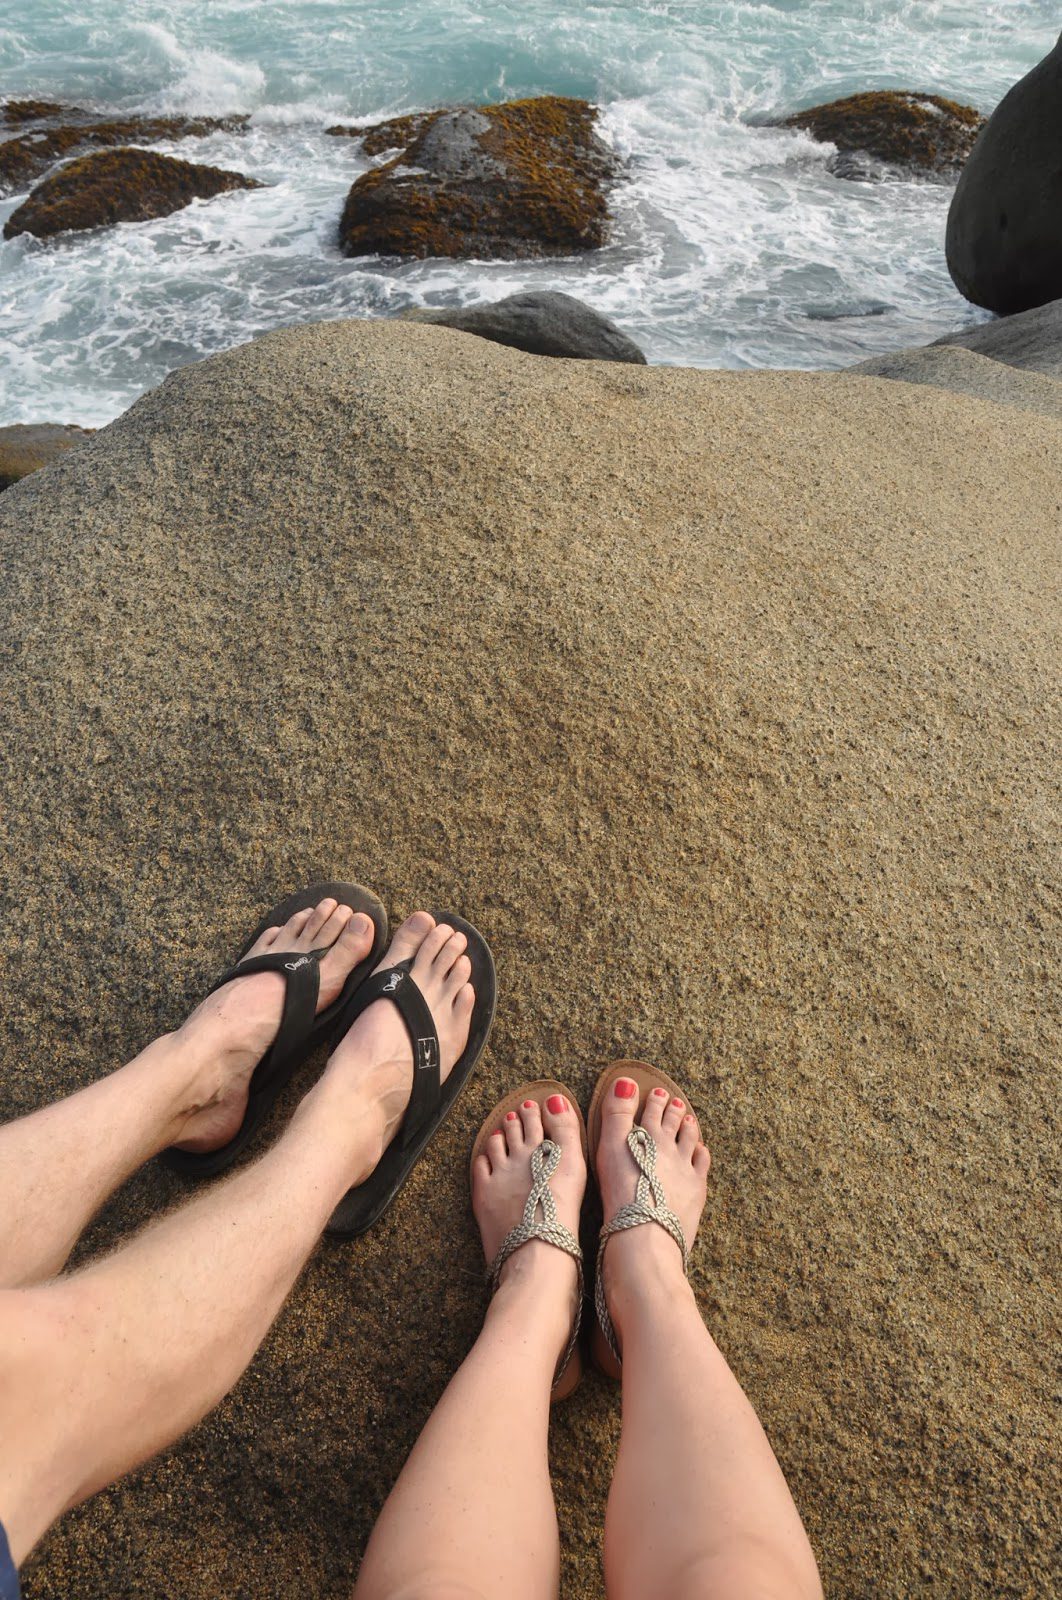 In love with Tayrona. (And yes, we like feet pictures!)